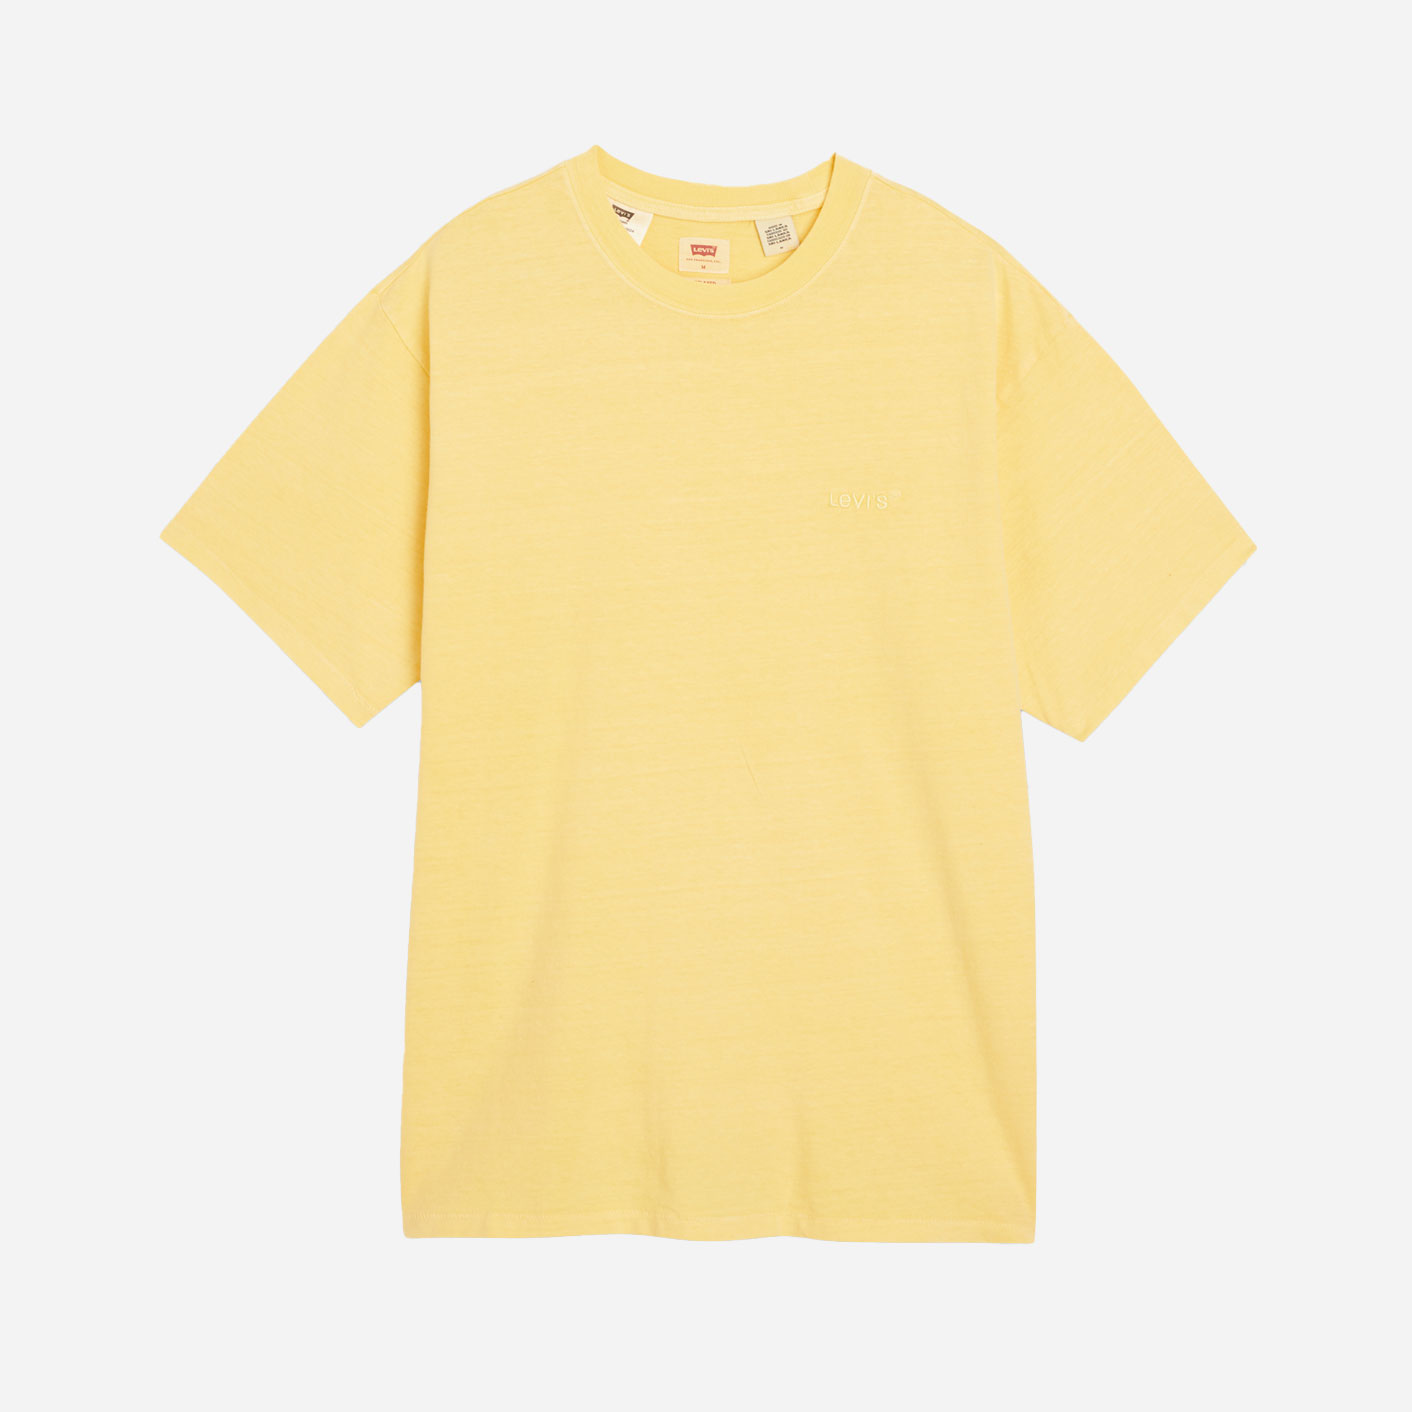 Levis Red Tab Vintage Tee - Yellow